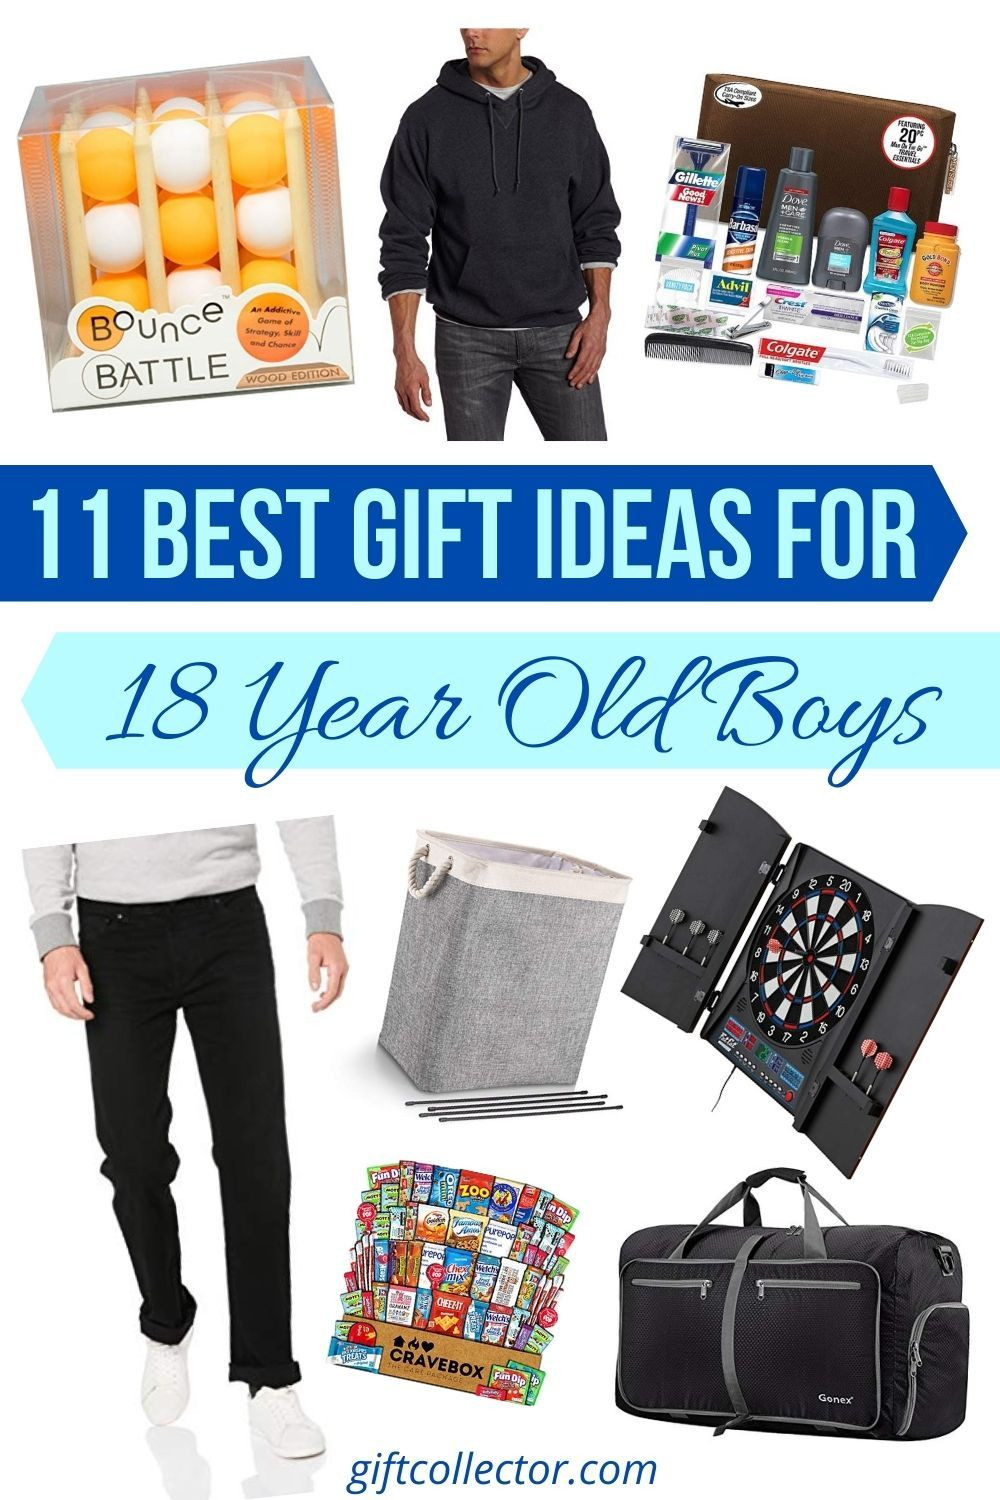 Gift Ideas For 18 Year Old Boys
 11 Best Gift Ideas for 18 Year Old Boys in 2020